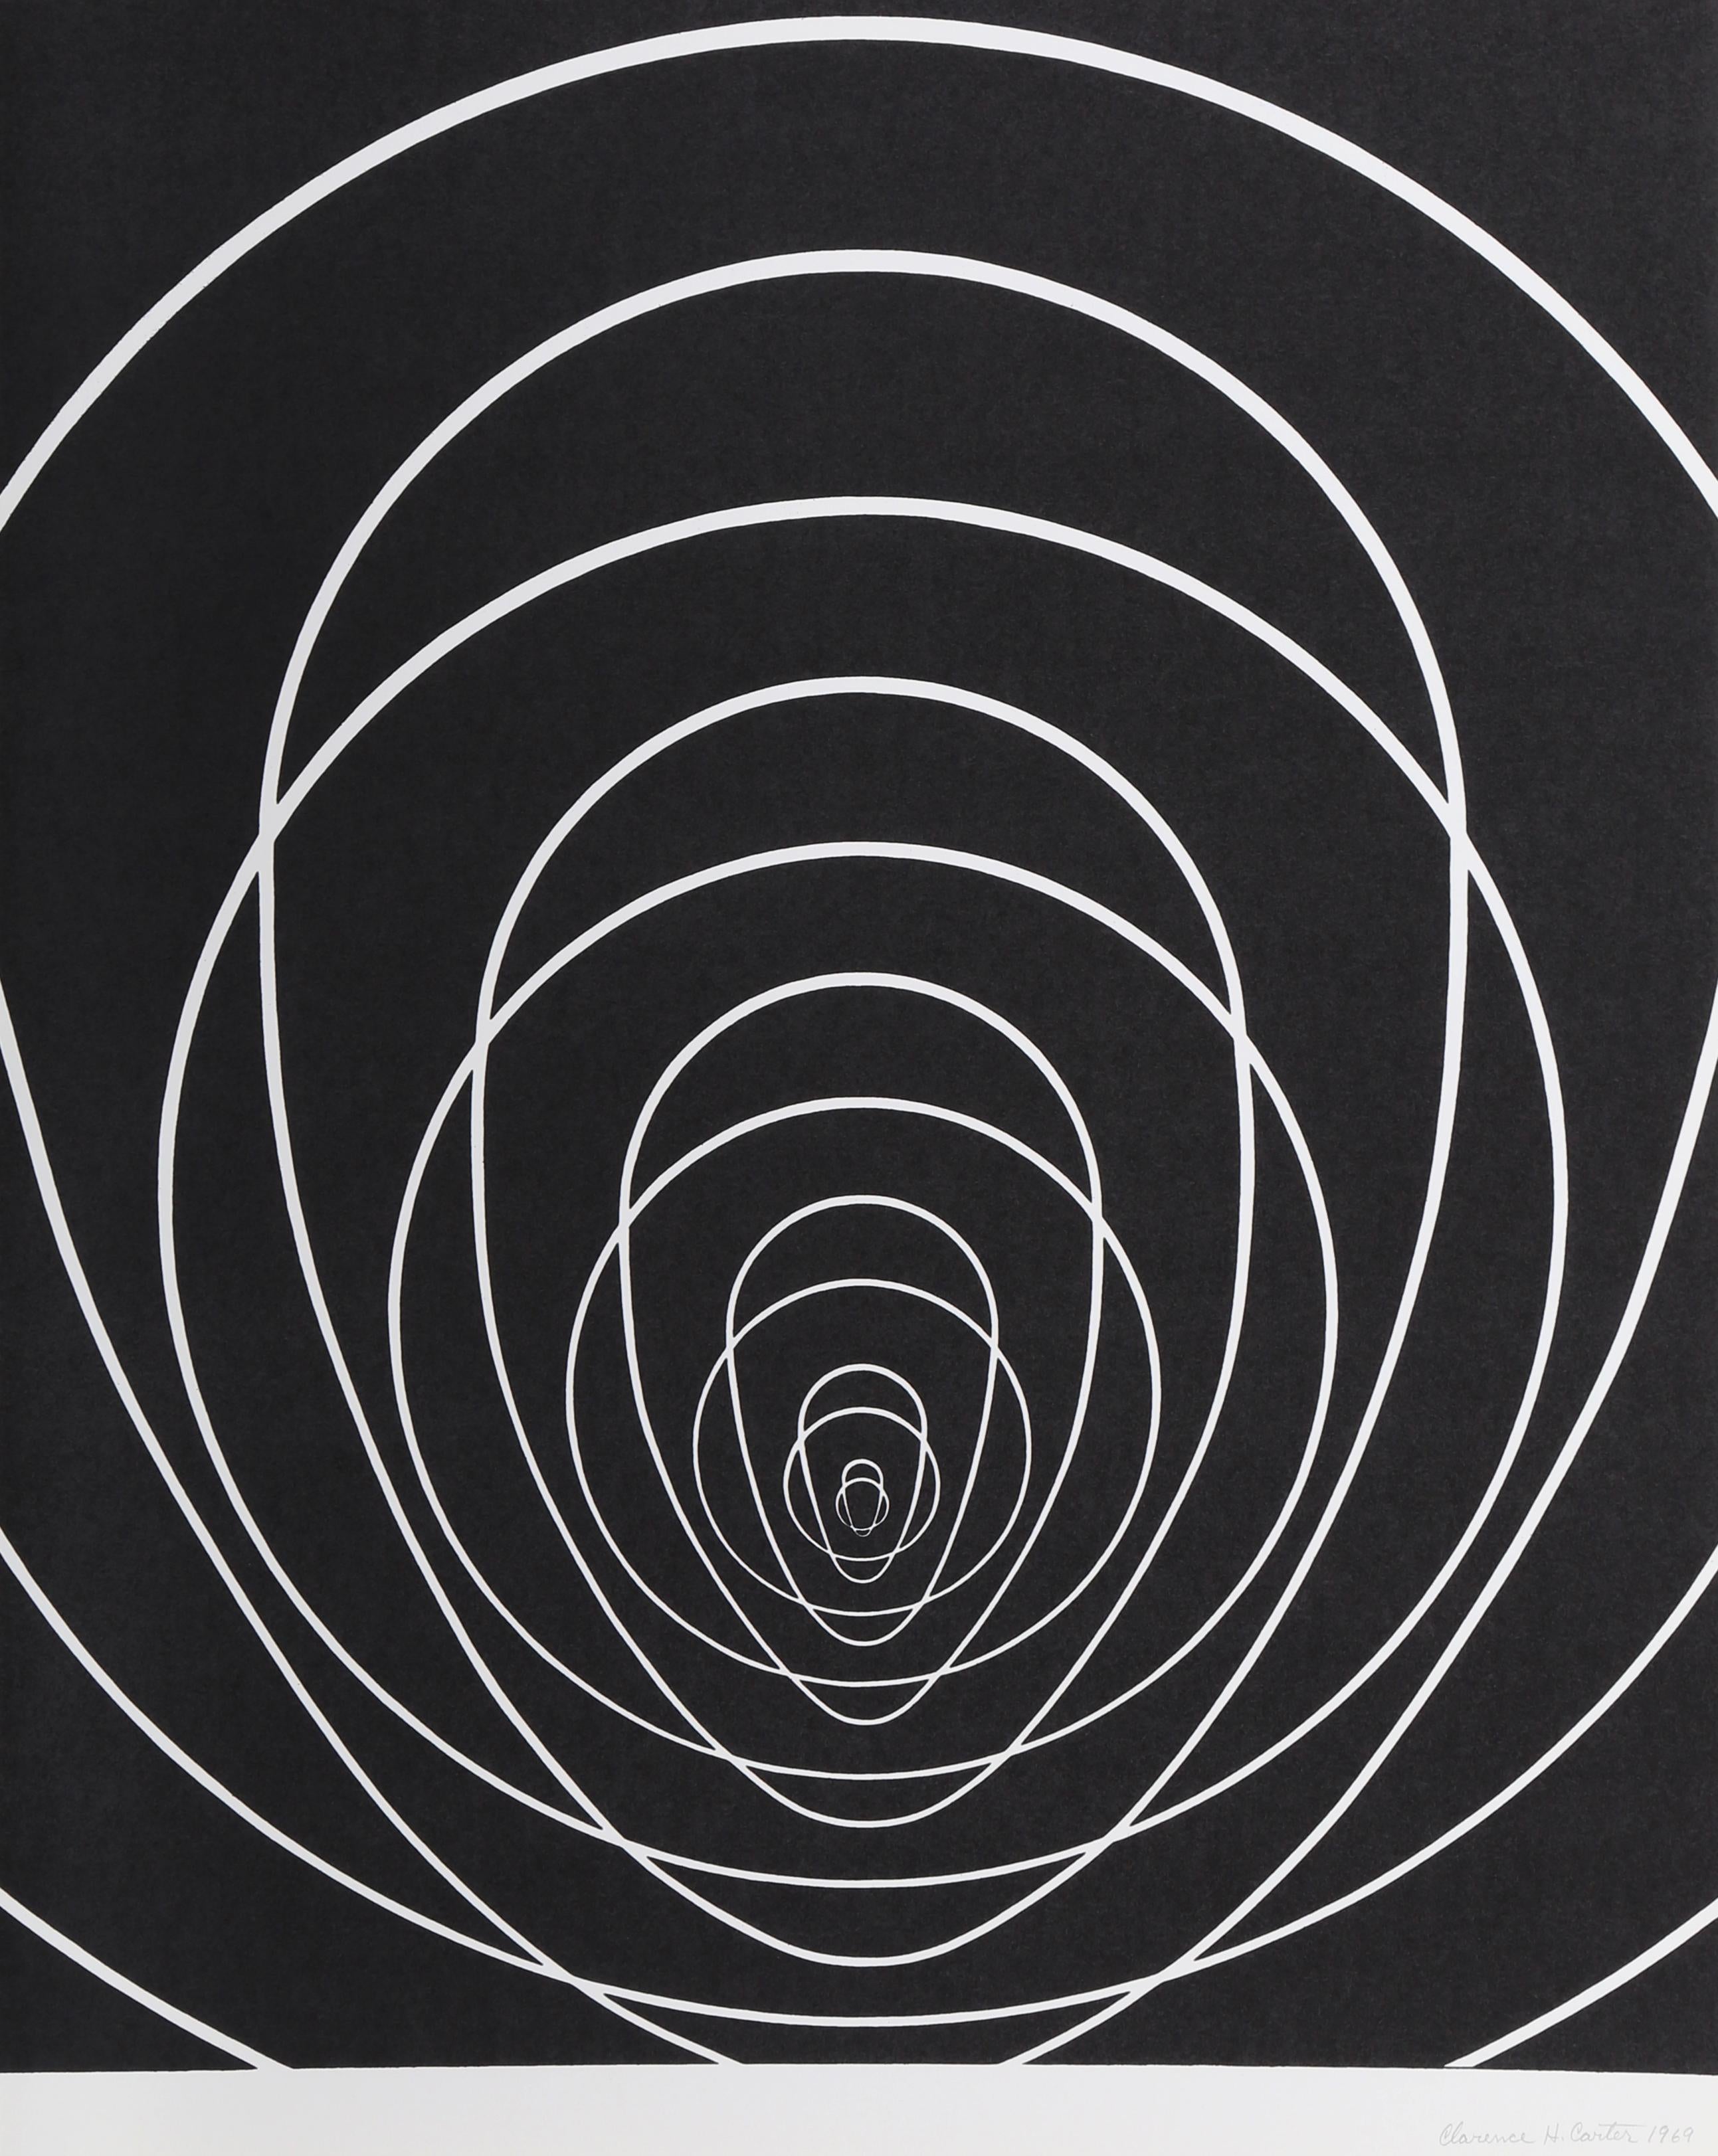 Artist: Clarence Holbrook Carter, American (1904 - 2000)
Title: Concentric Space (White)
Year: 1969
Medium: Serigraph, signed and numbered in pencil
Edition: 50
Size: 29 x 22 inches
